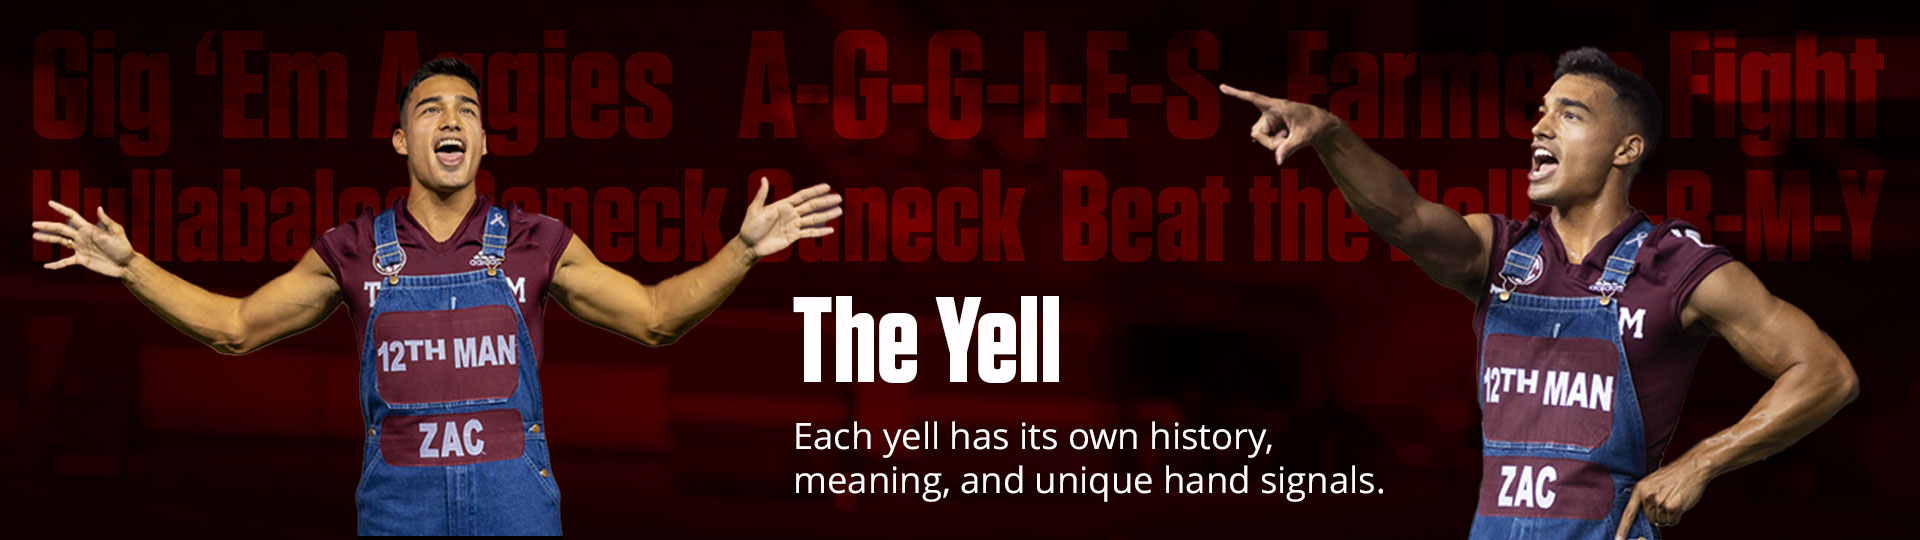 Graphic that reads "The Yell. Each yell has its own history, meaning and unique hand signals"